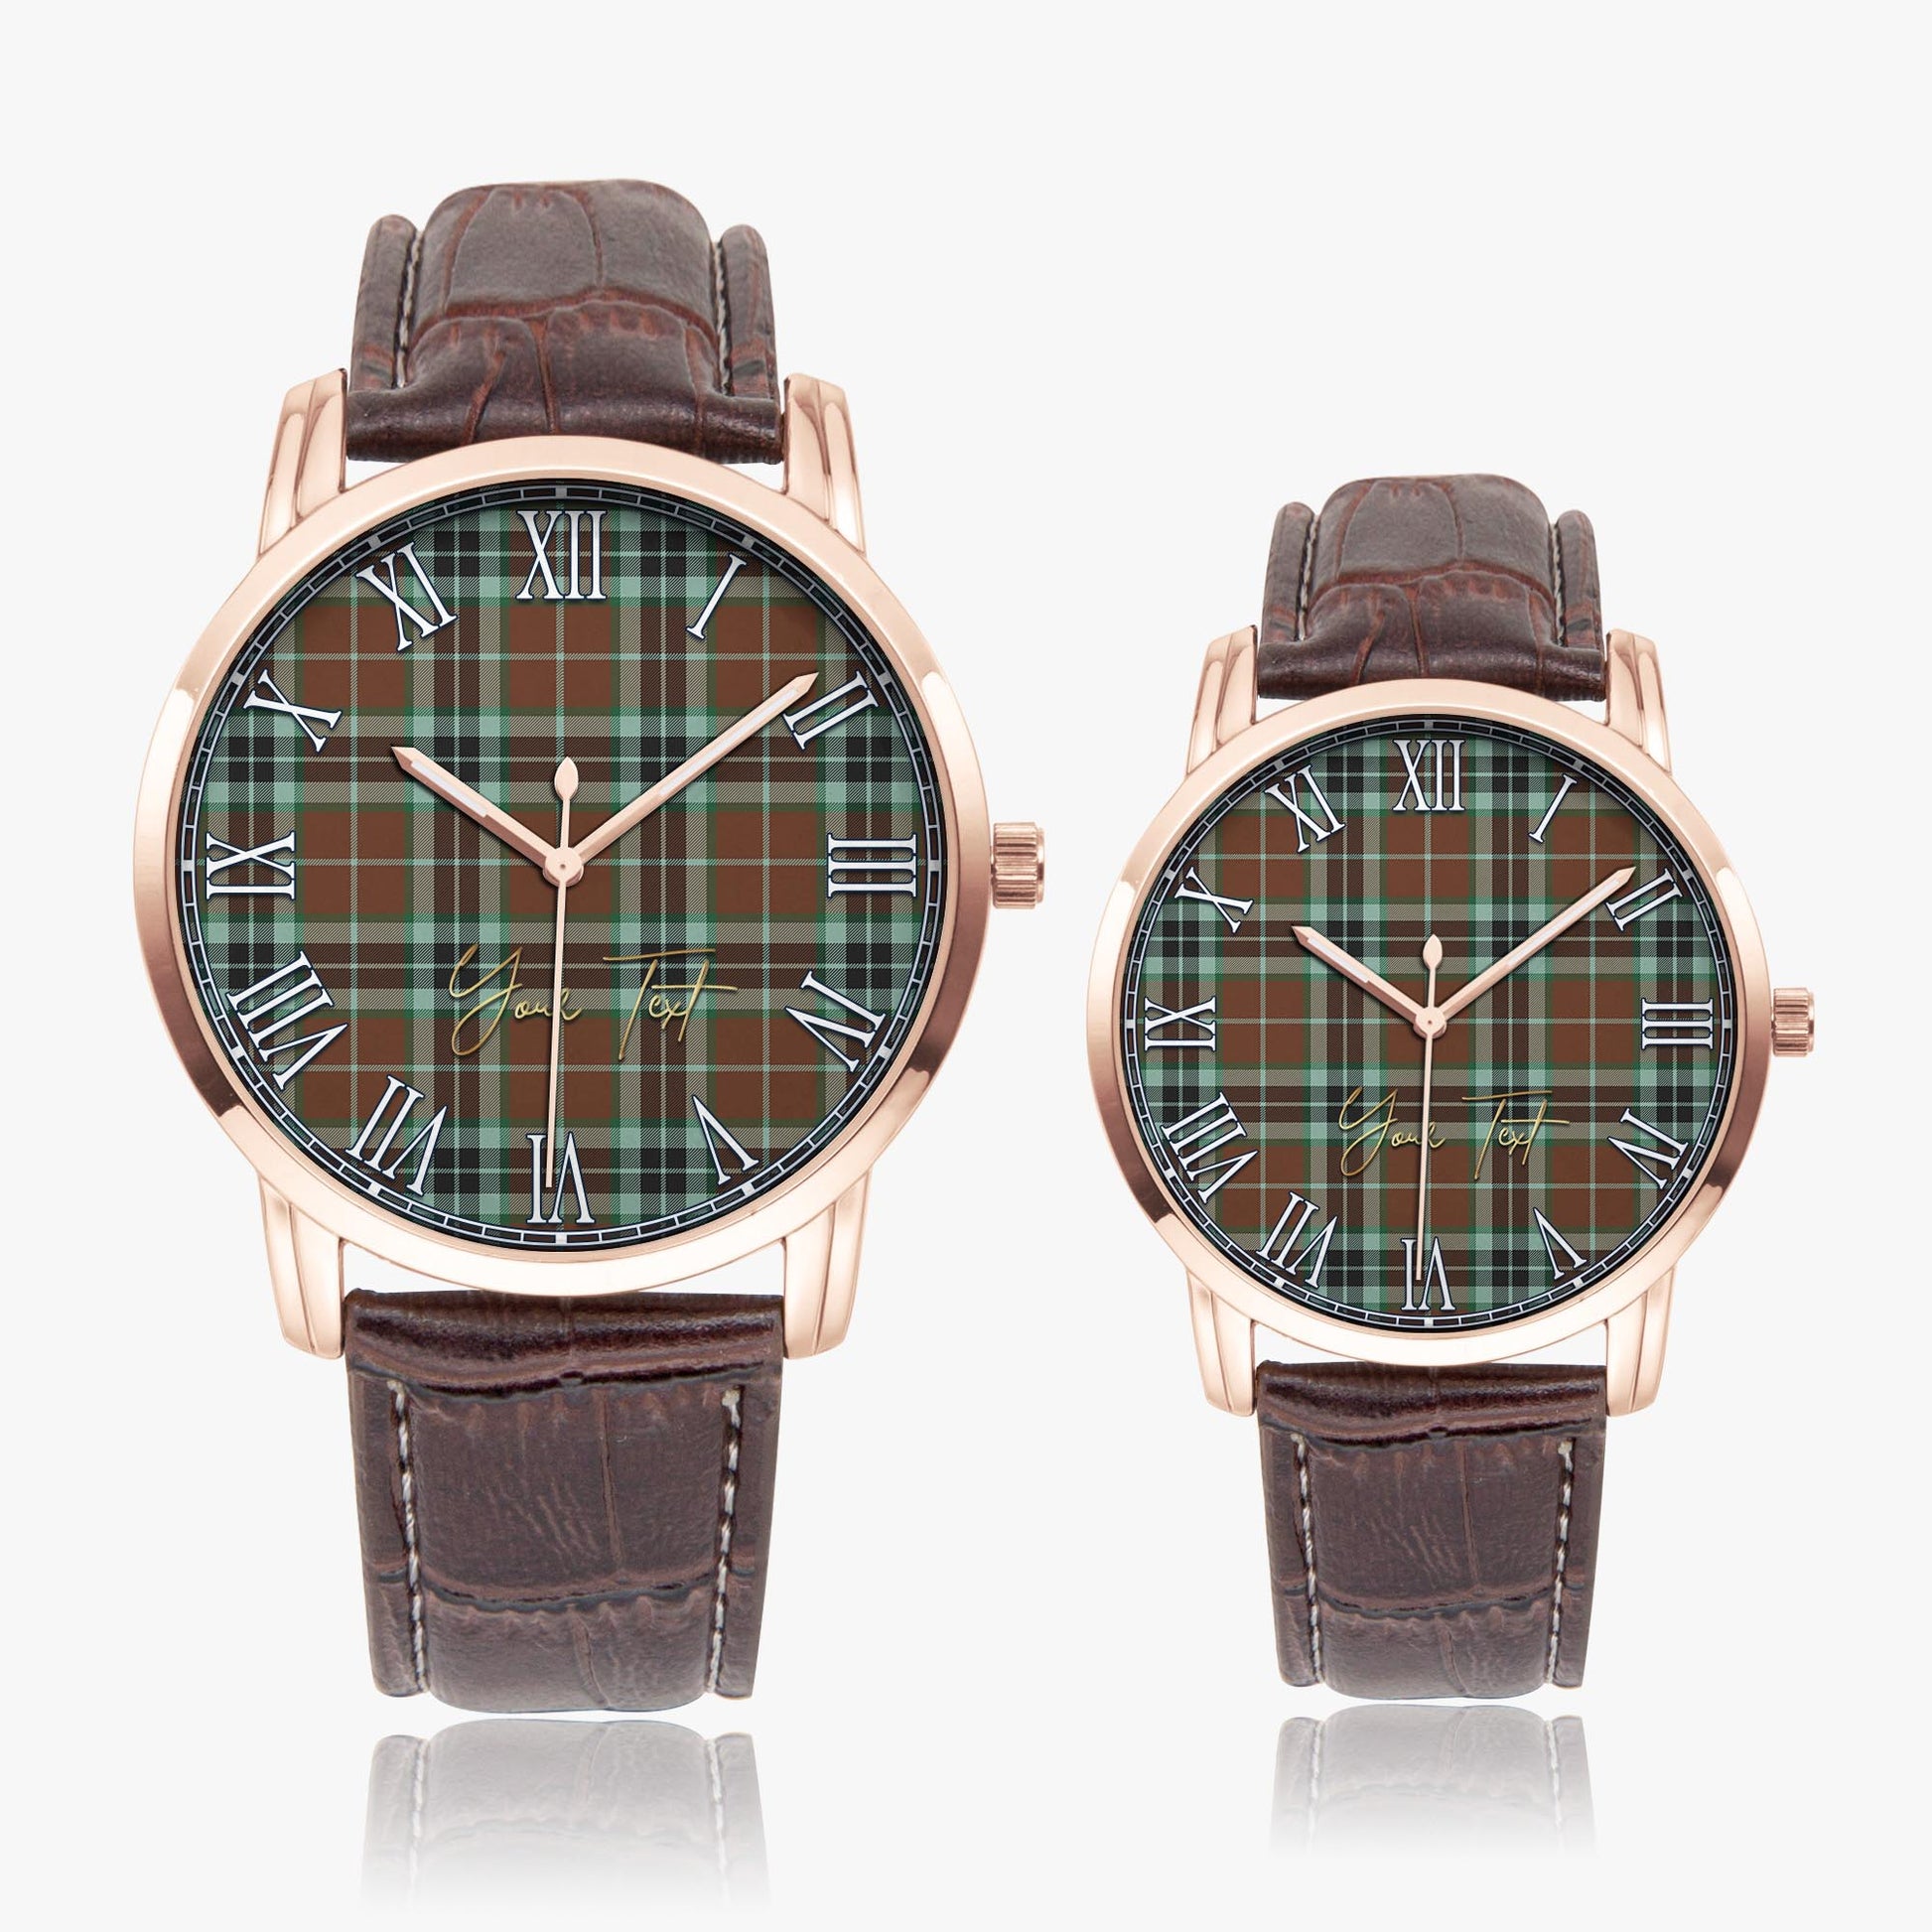 Thomson Hunting Modern Tartan Personalized Your Text Leather Trap Quartz Watch Wide Type Rose Gold Case With Brown Leather Strap - Tartanvibesclothing Shop